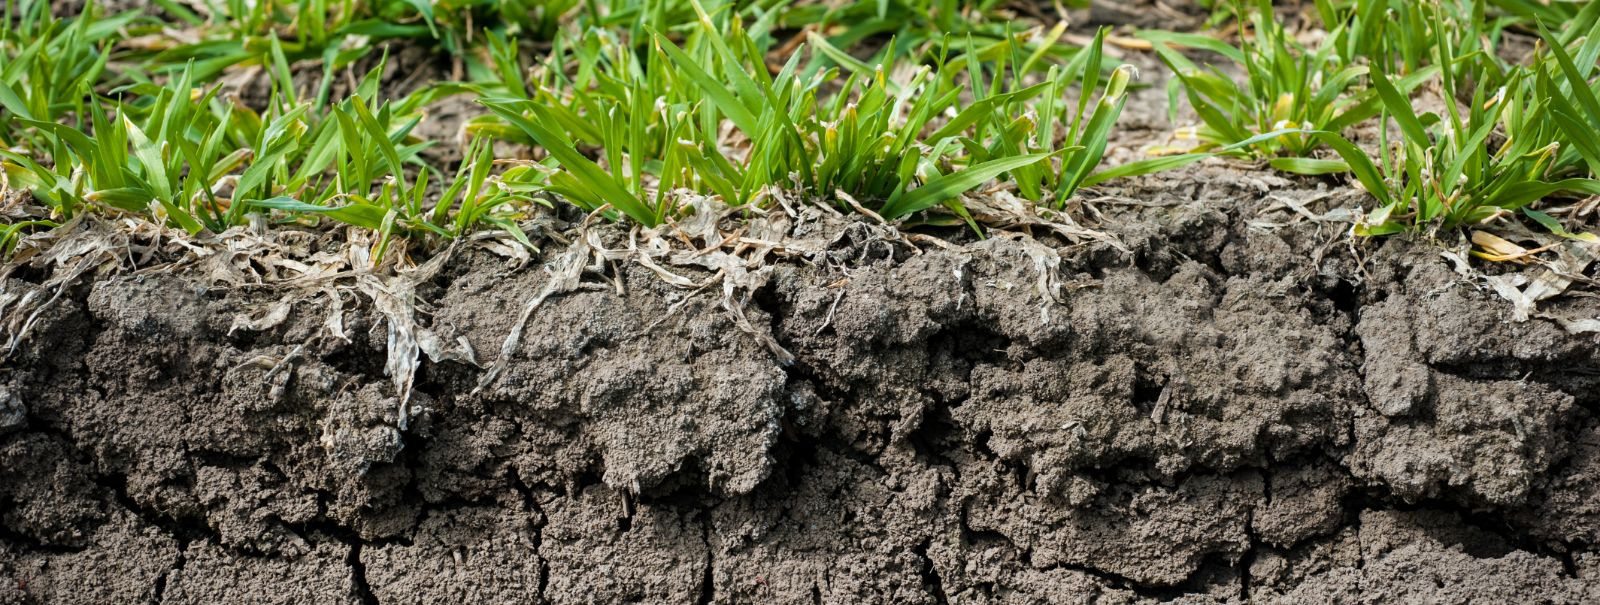 Soil health is the foundation of productive agriculture. Healthy soil supports plant growth by providing essential nutrients, water, and a stable structure. It 